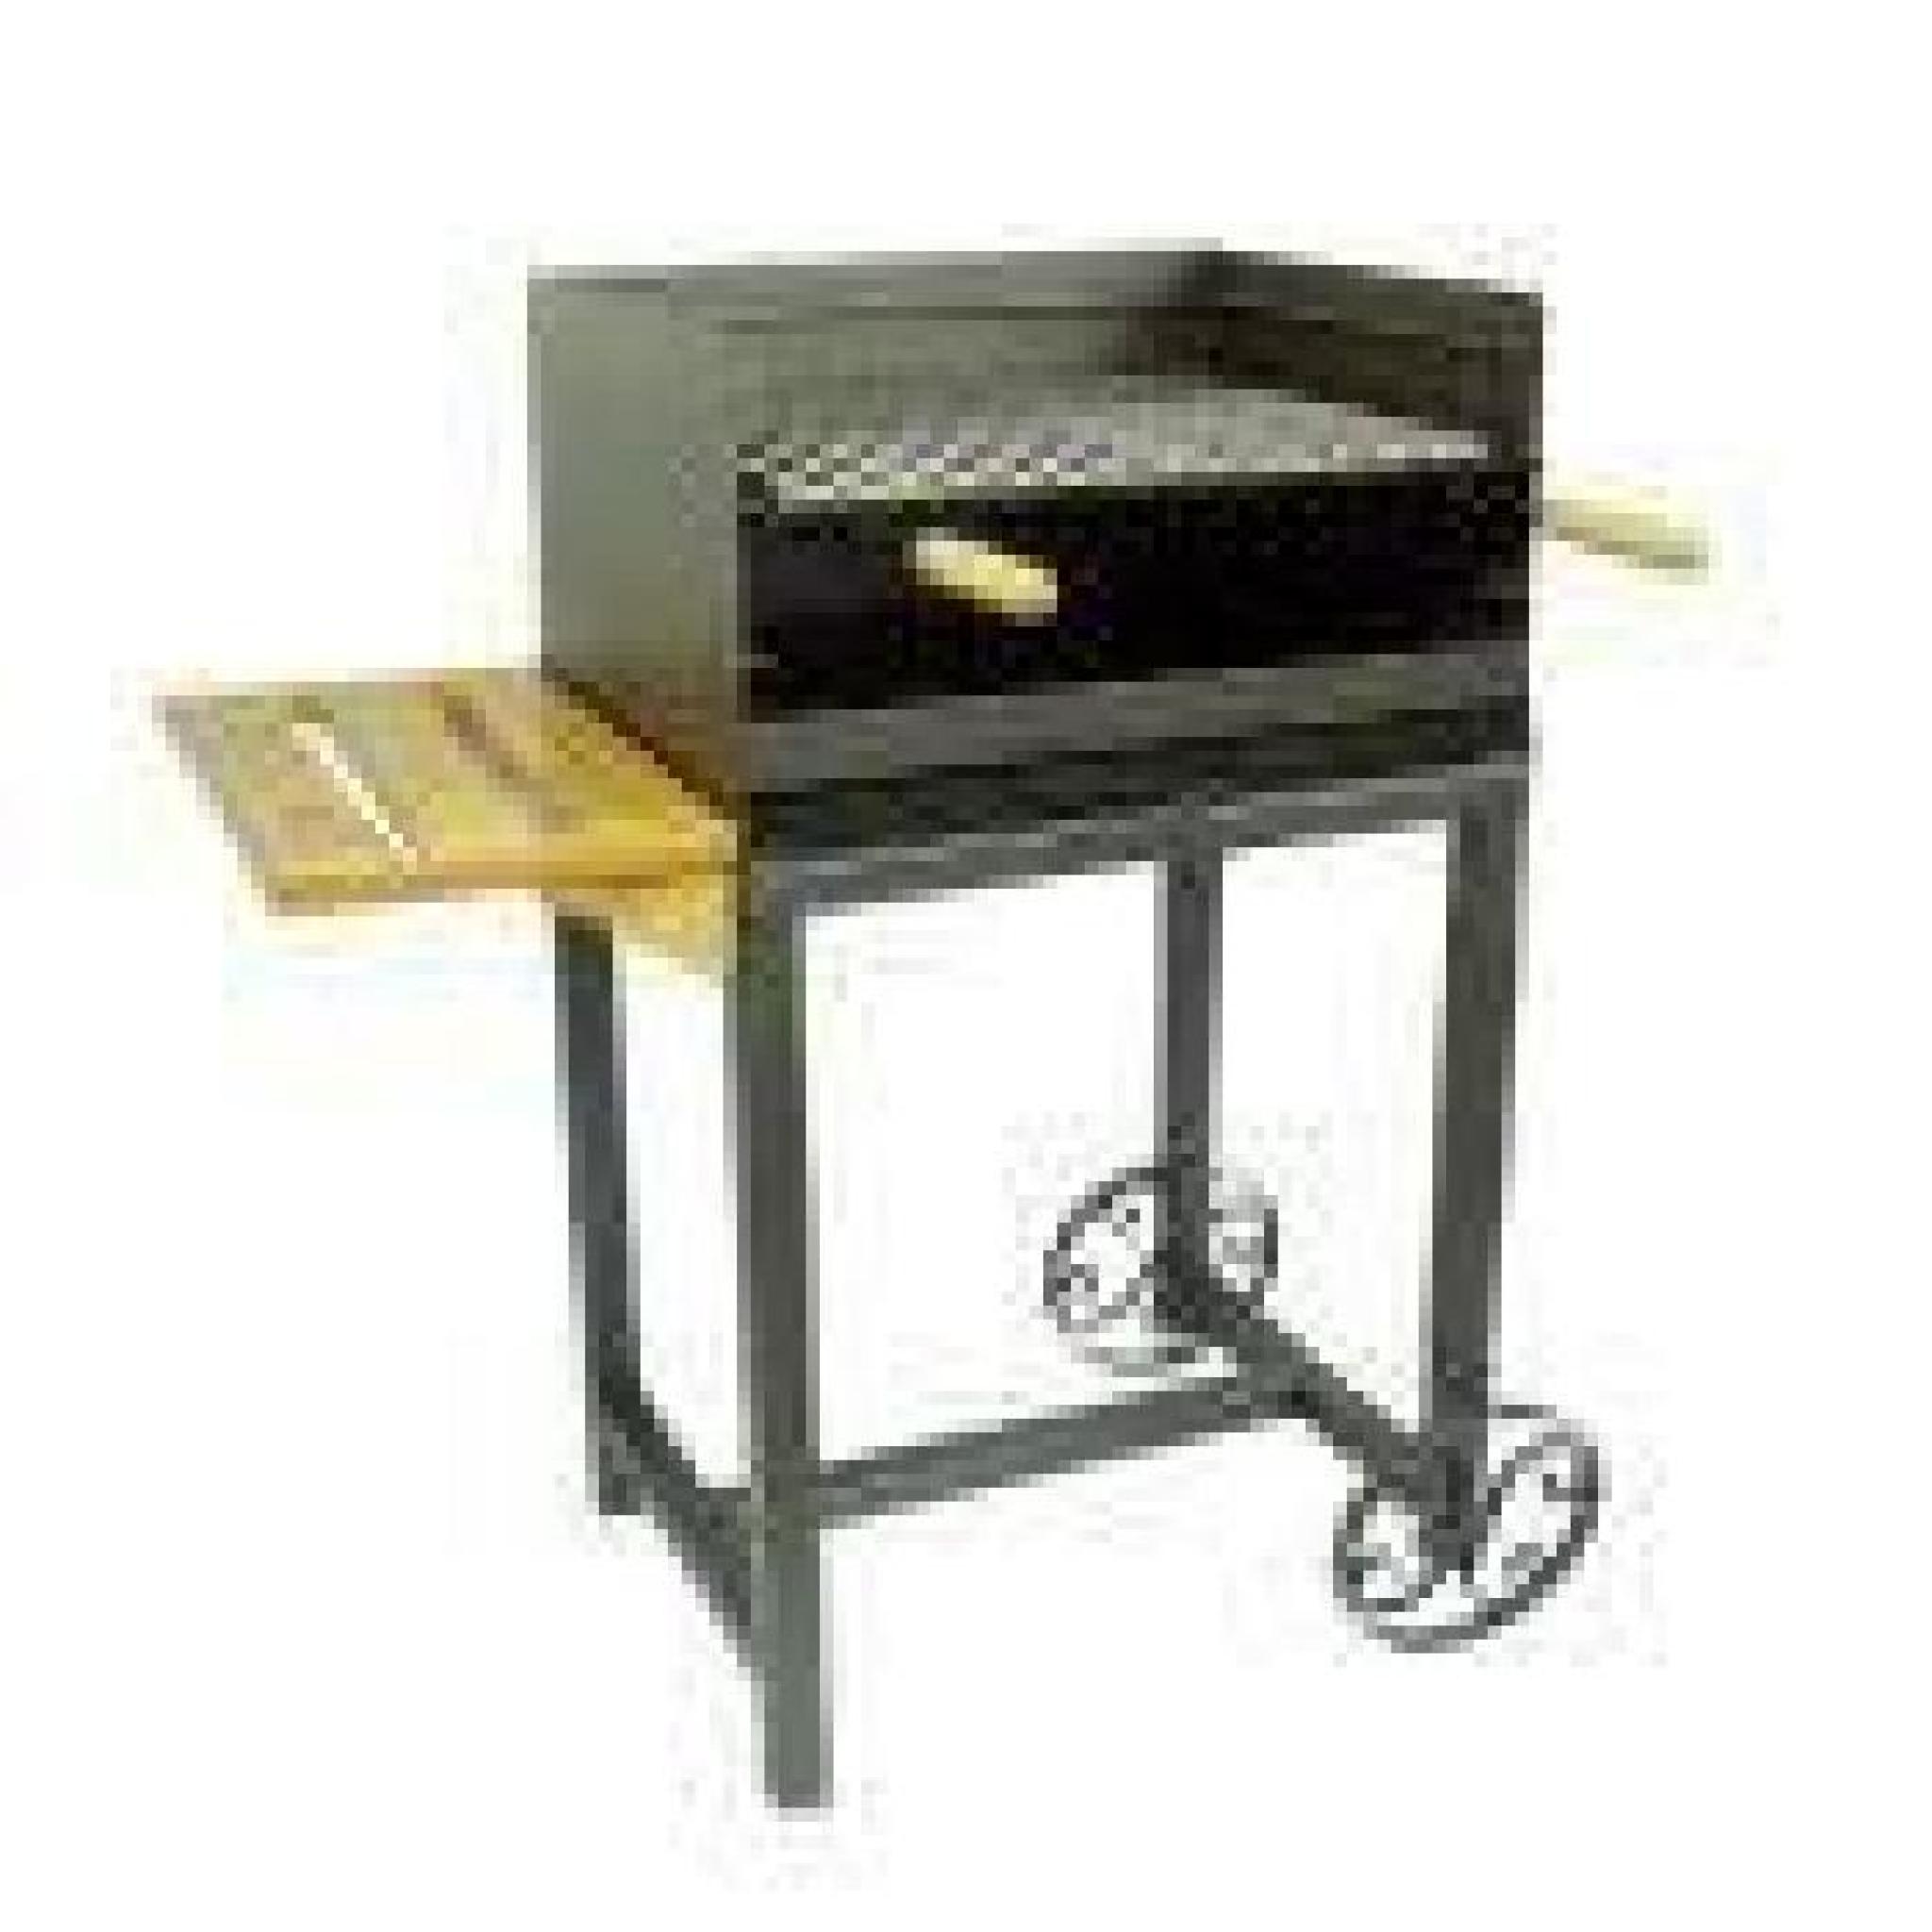 Barbecue Artisanal - 1000x720x400 mm pas cher